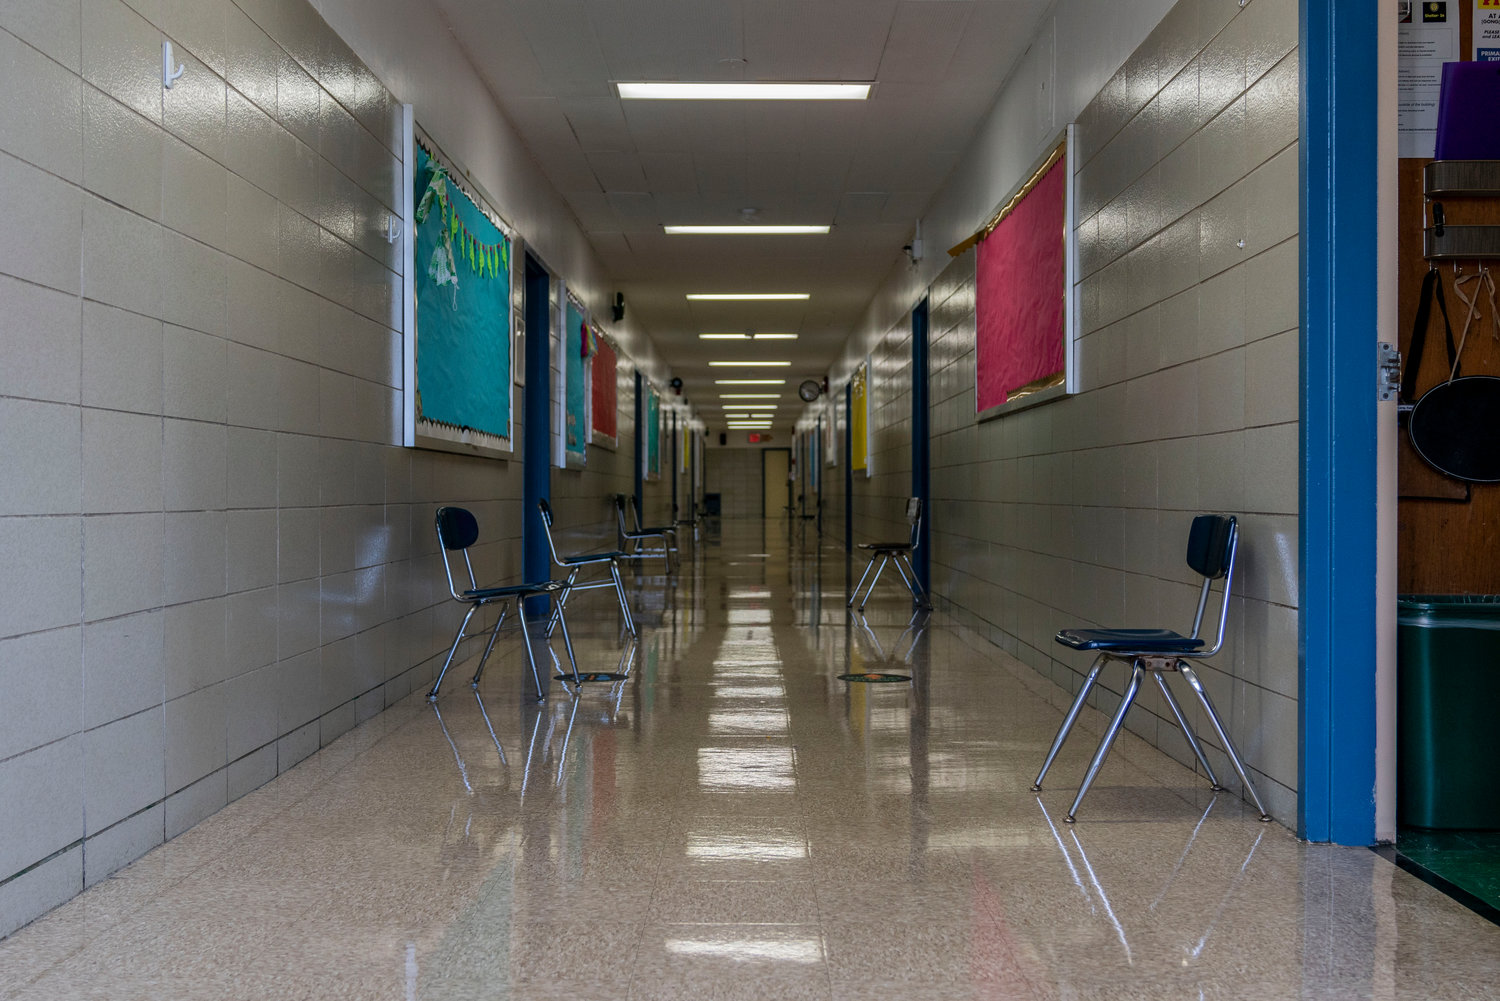 To avoid hallway crowding, each classroom at P.S. 24 Spuyten Duyvil has at least one chair outside for students to sit and wait to be called on by a hallway monitor. Measures like this will hopefully help keep public schools open as long as possible in the wake of the coronavirus pandemic.